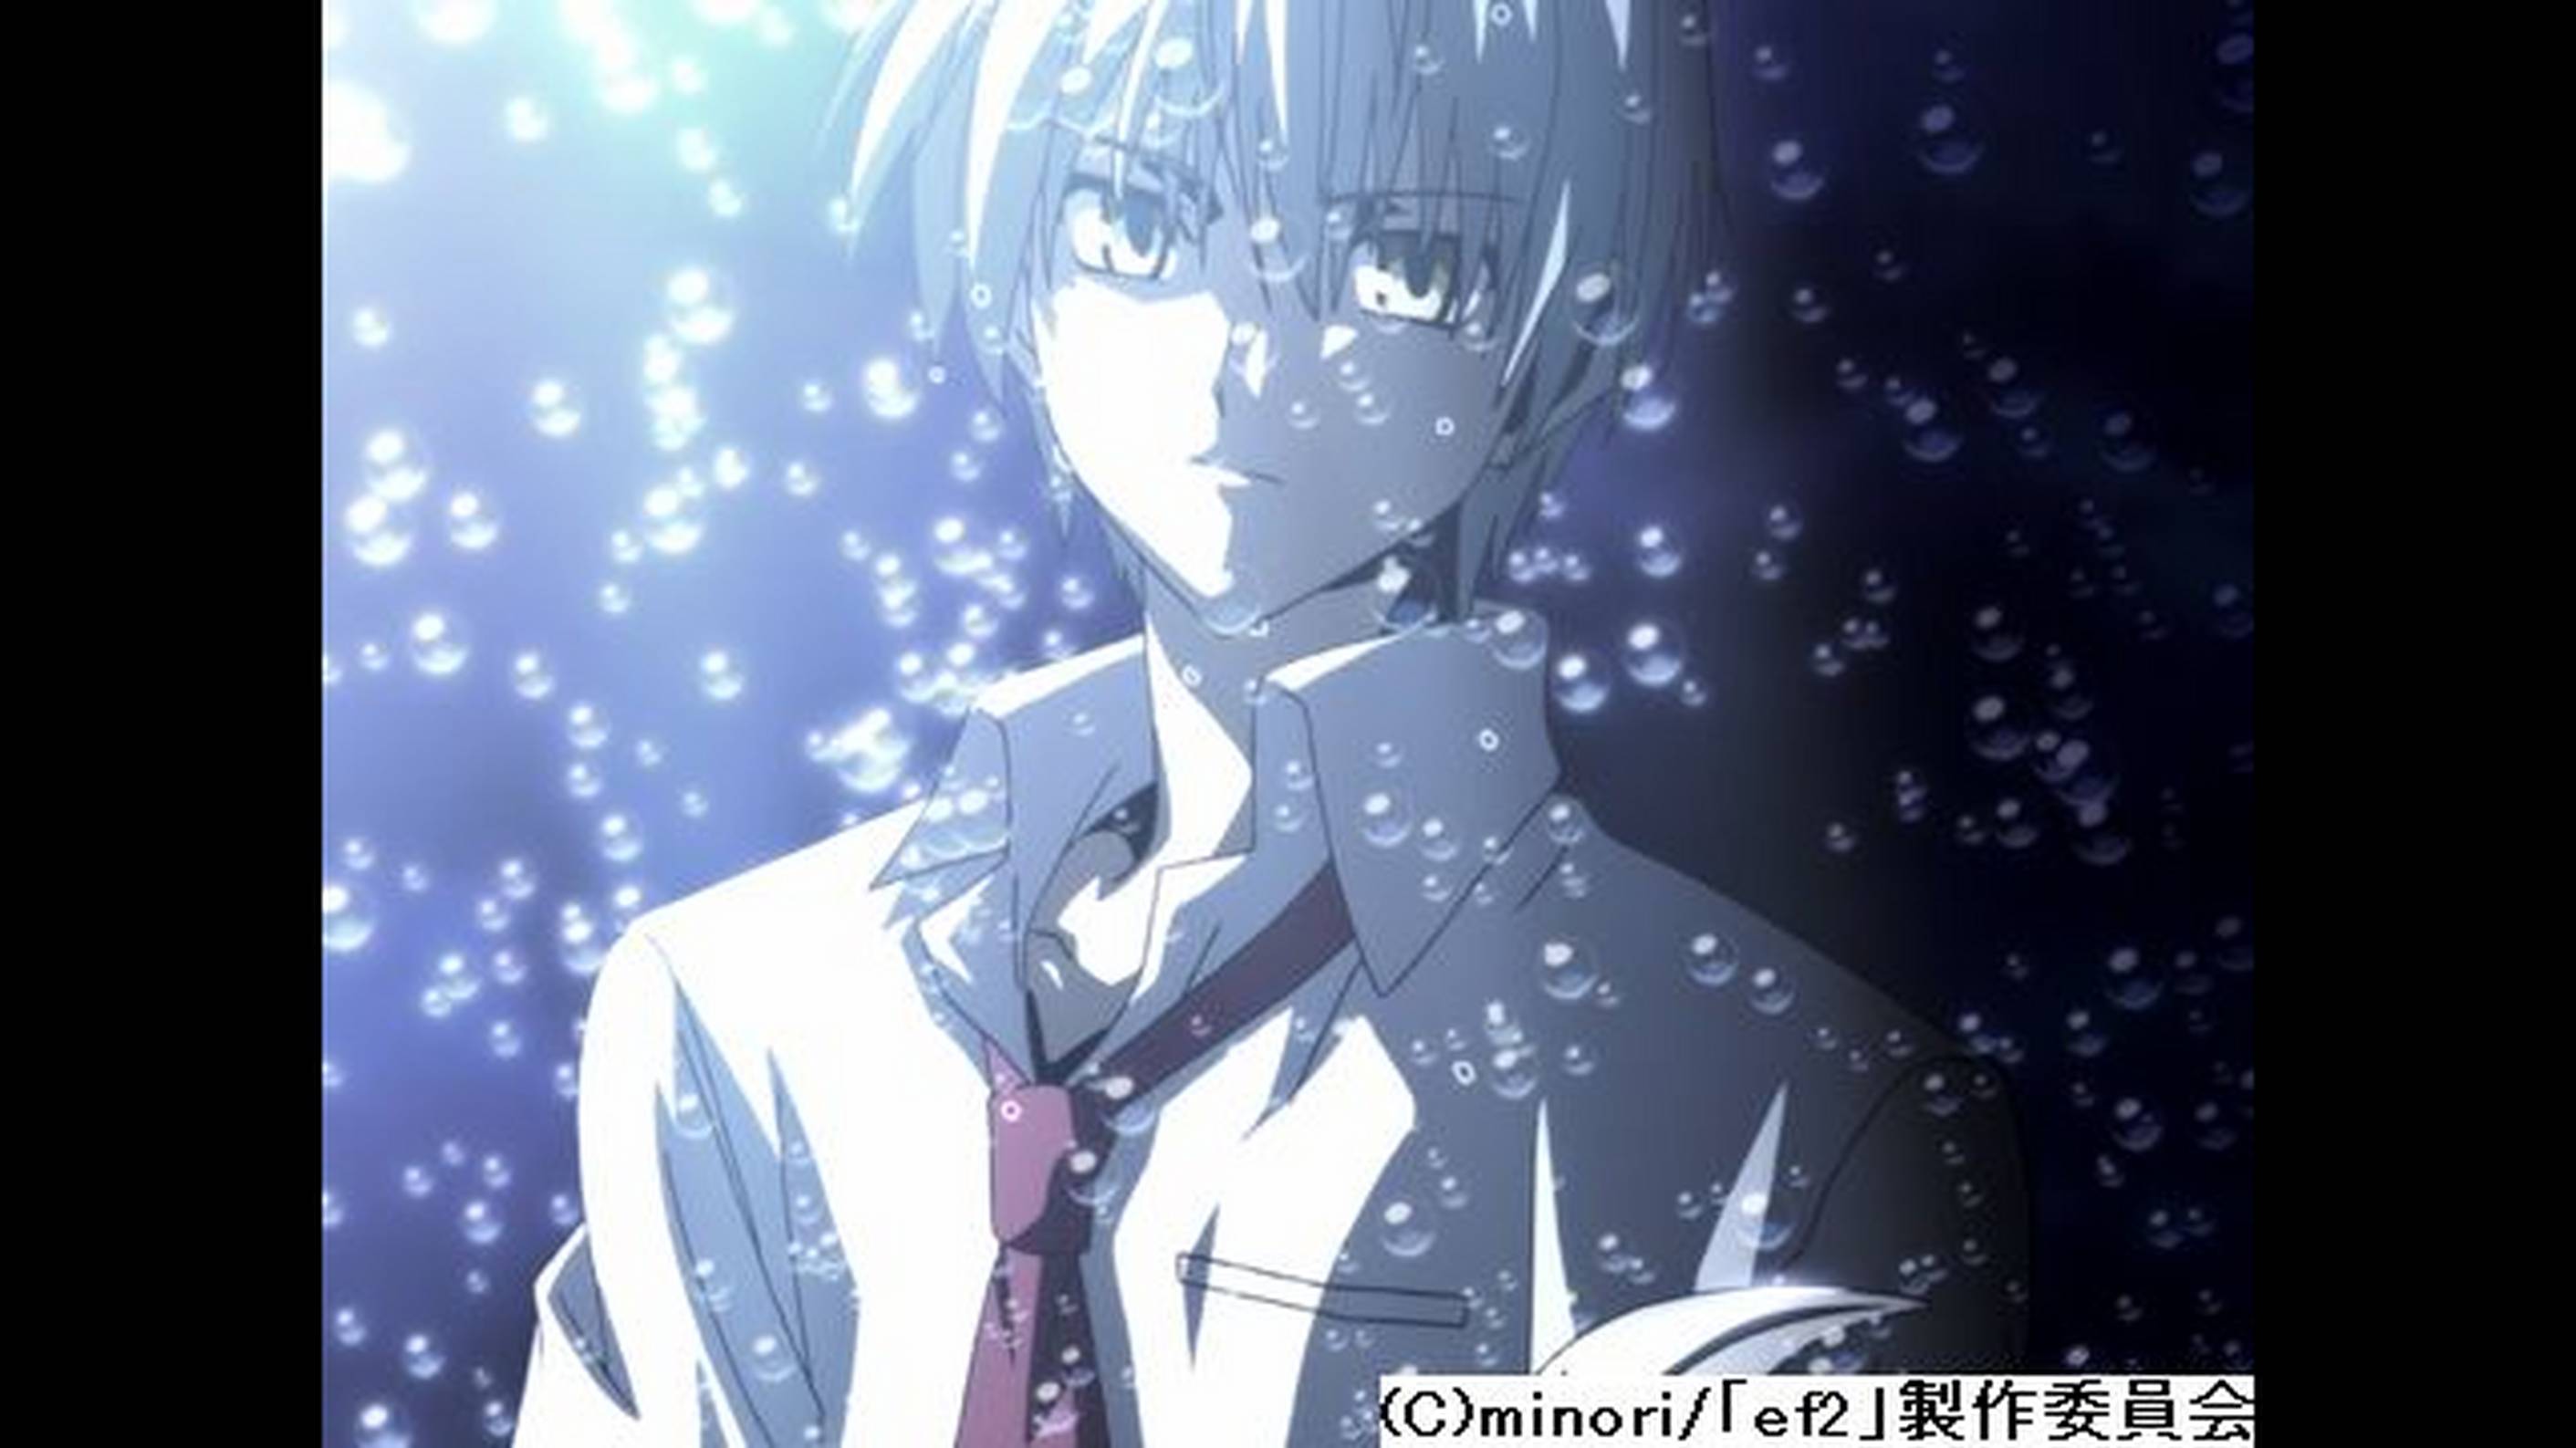 Ef A Tale Of Melodies 07 Reflection アニメ 08 の動画視聴 U Next 31日間無料トライアル